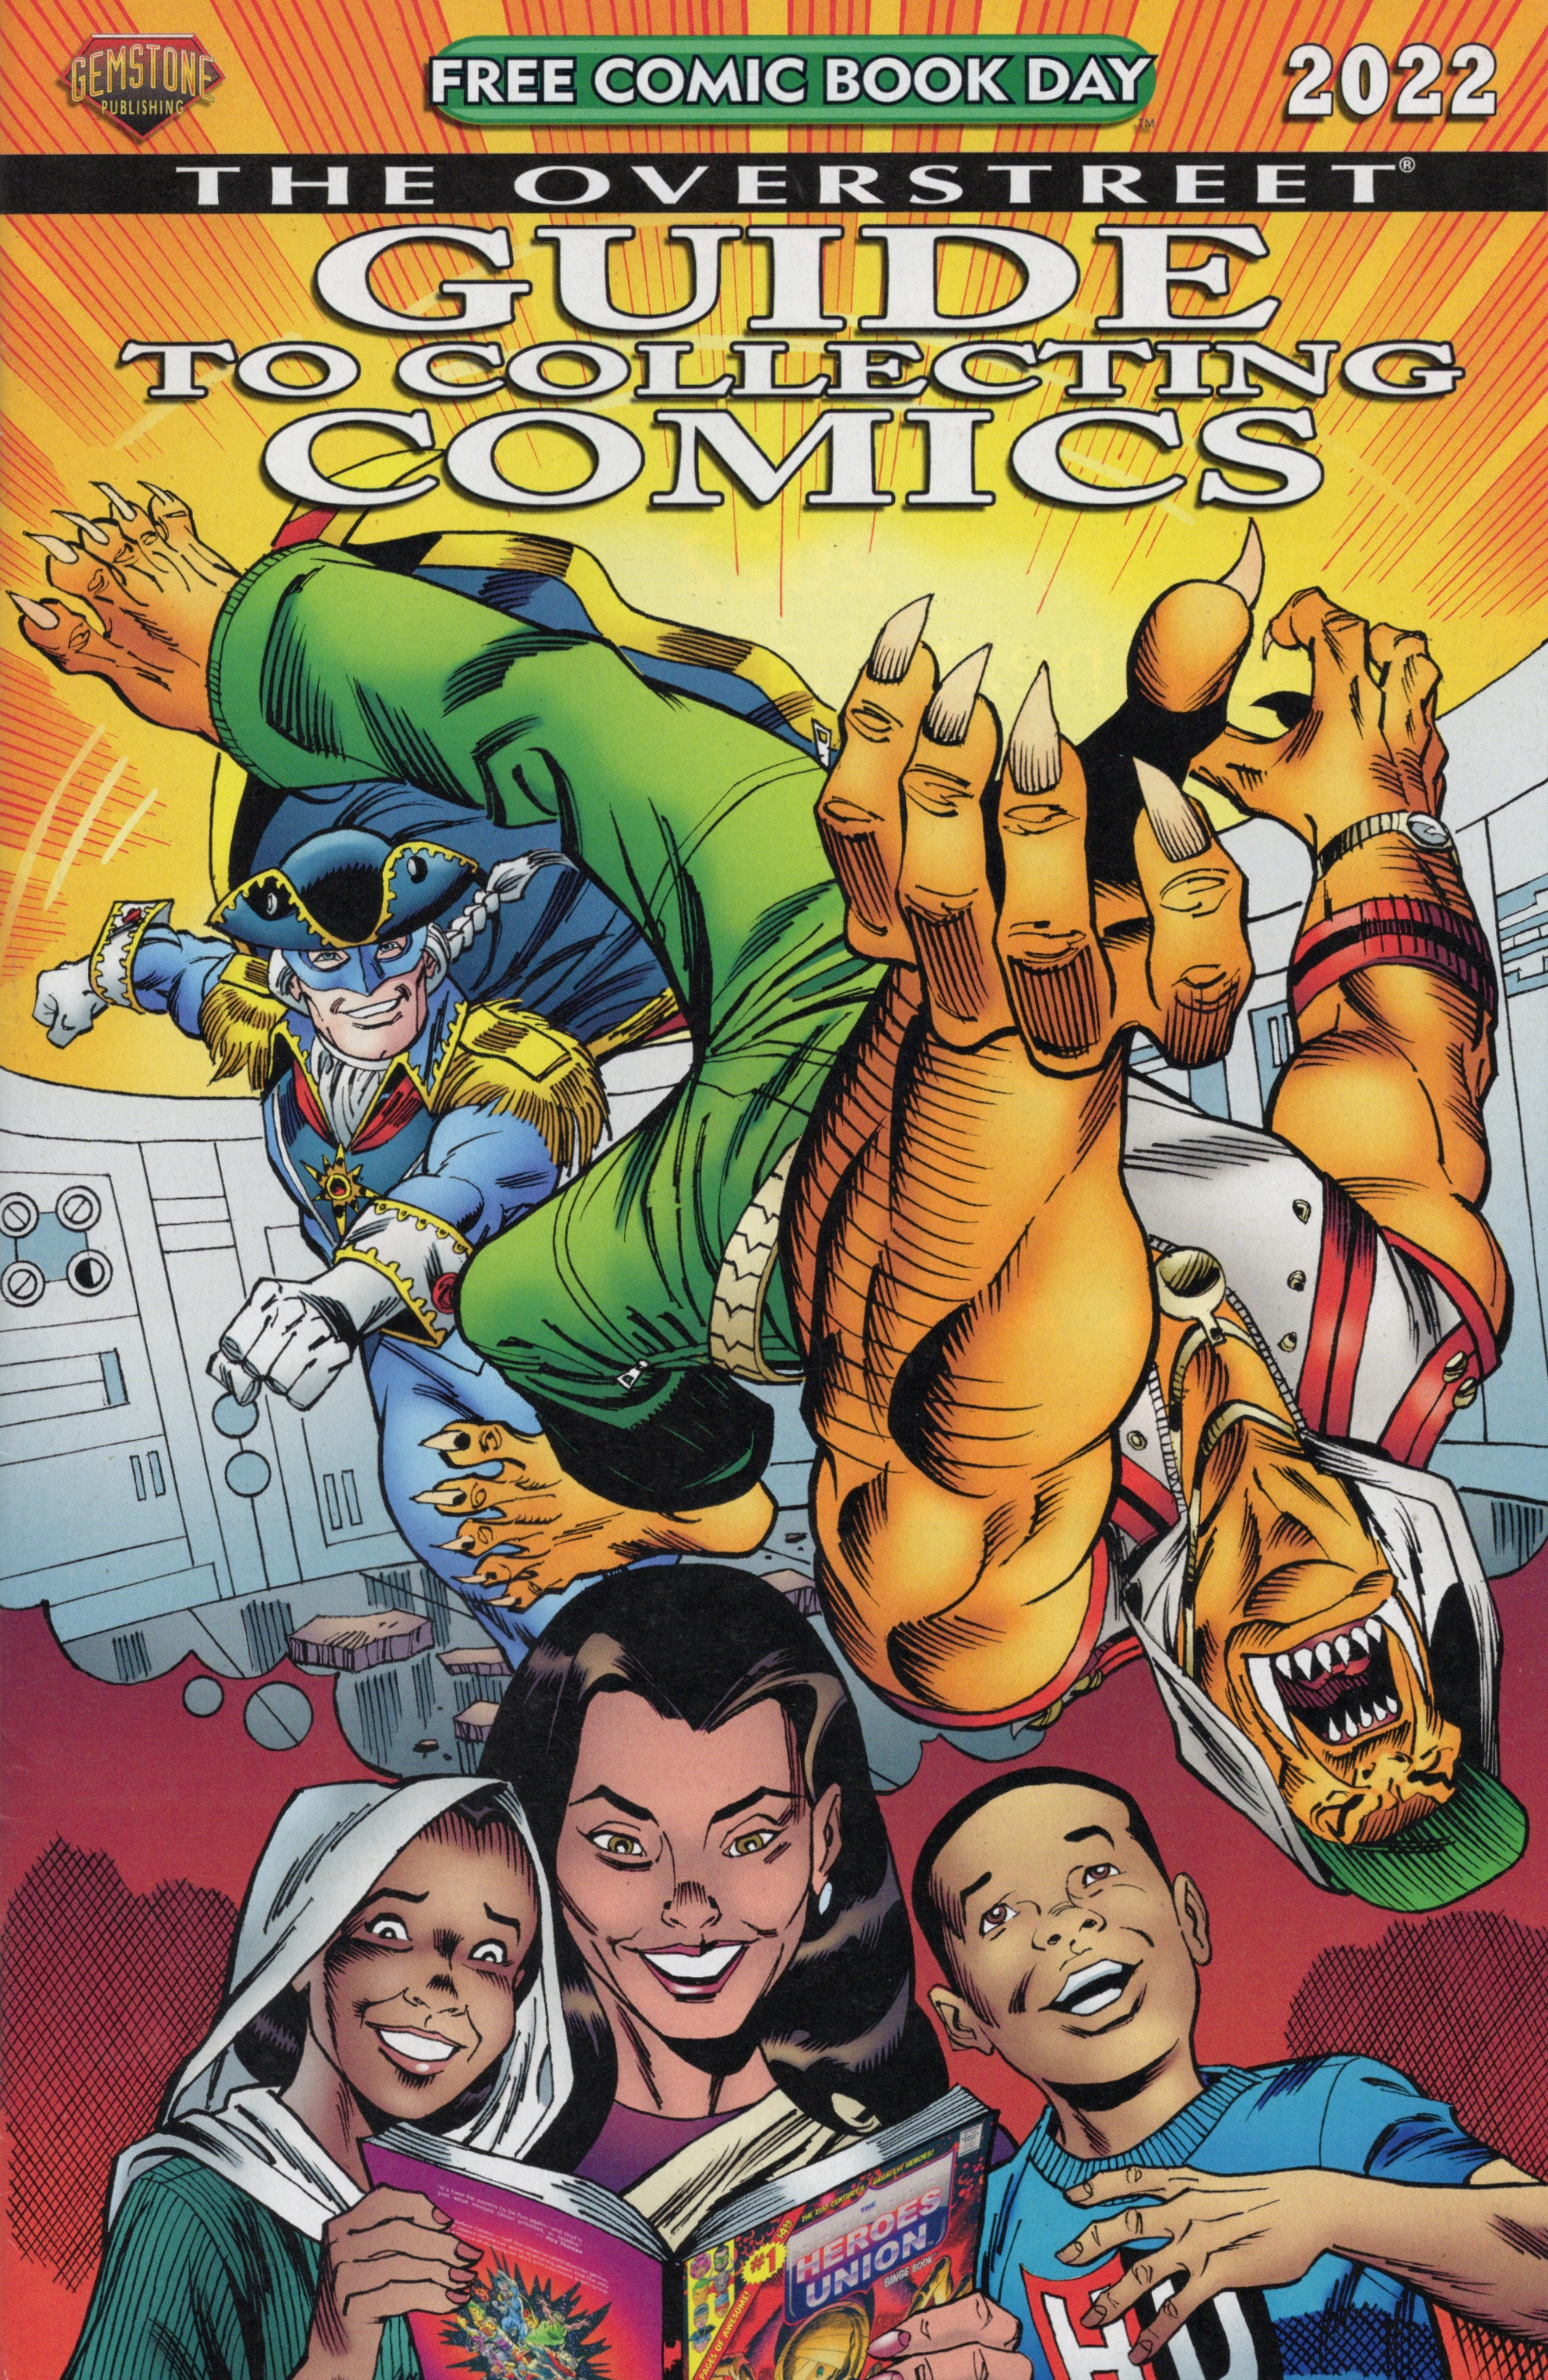 Read online Free Comic Book Day 2022 comic -  Issue # Gemstone Publishing The Overstreet Guide To Collecting Comics - 1